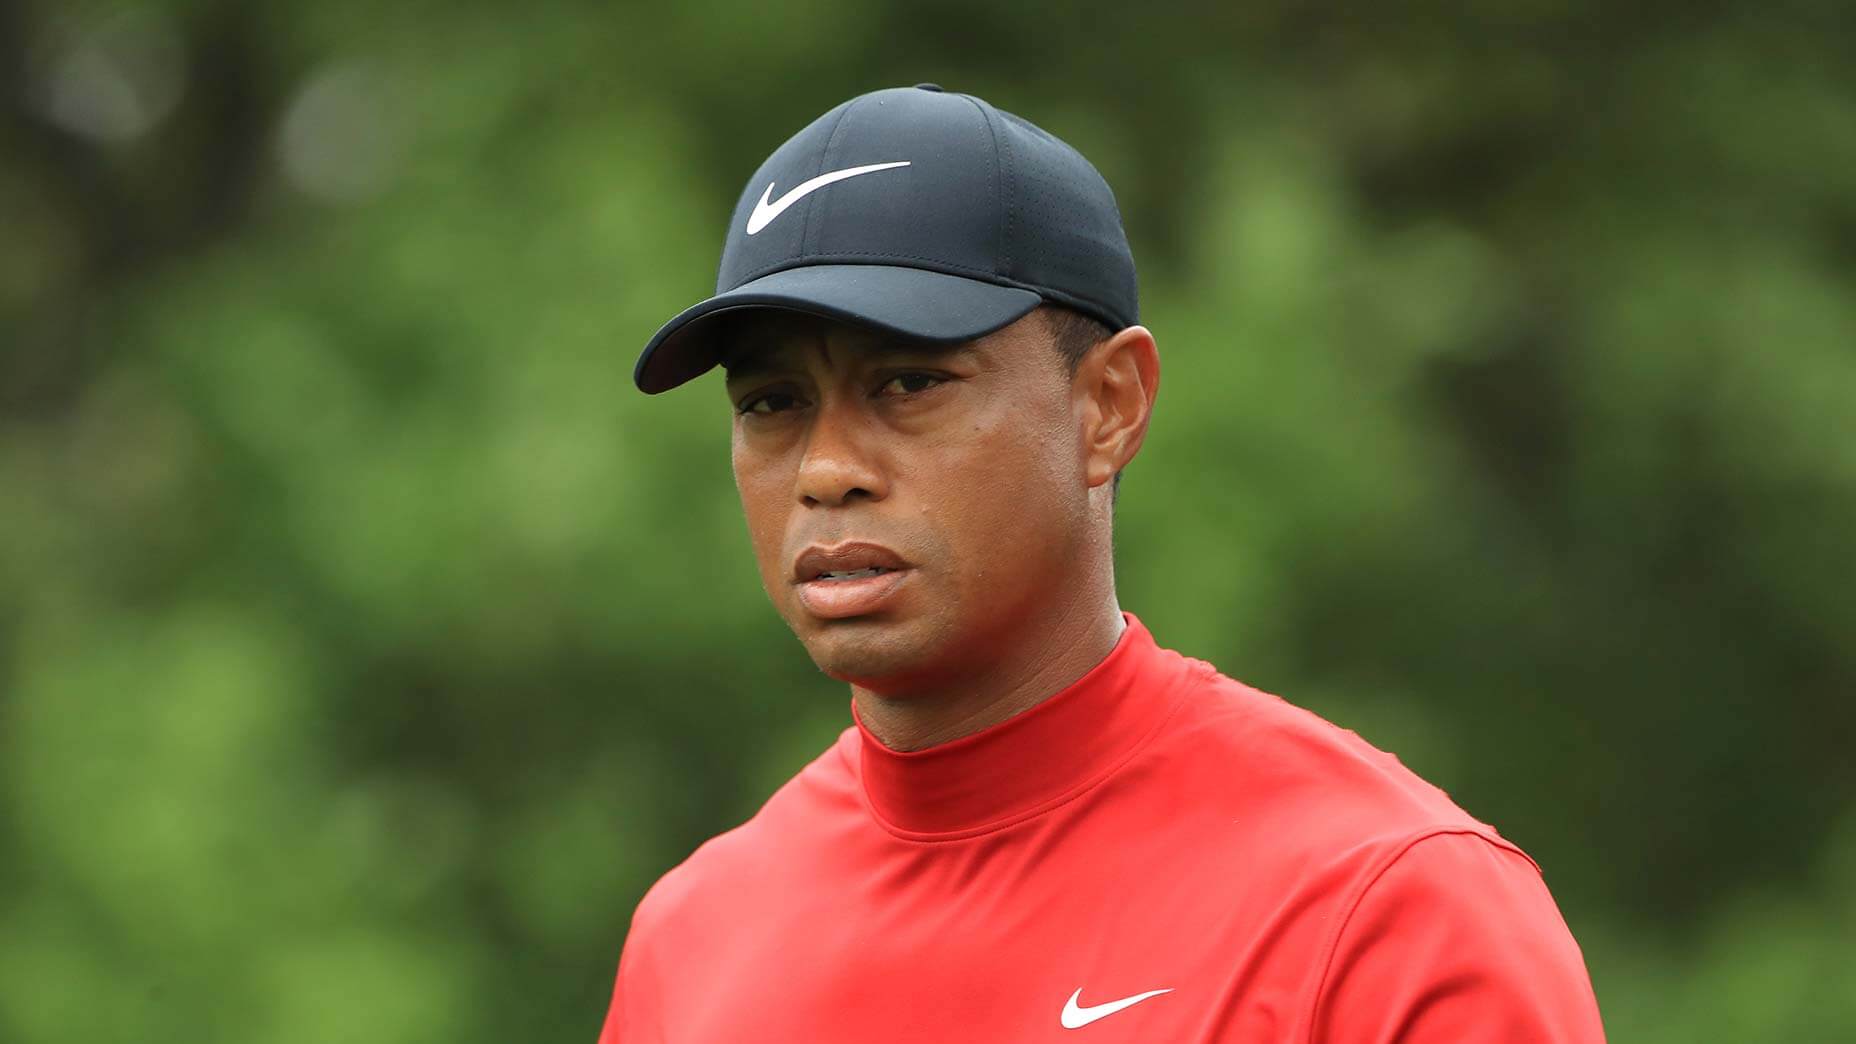 Tiger Woods Injured In Serious Car Accident 'Jaws Of Life' Used To Save ...